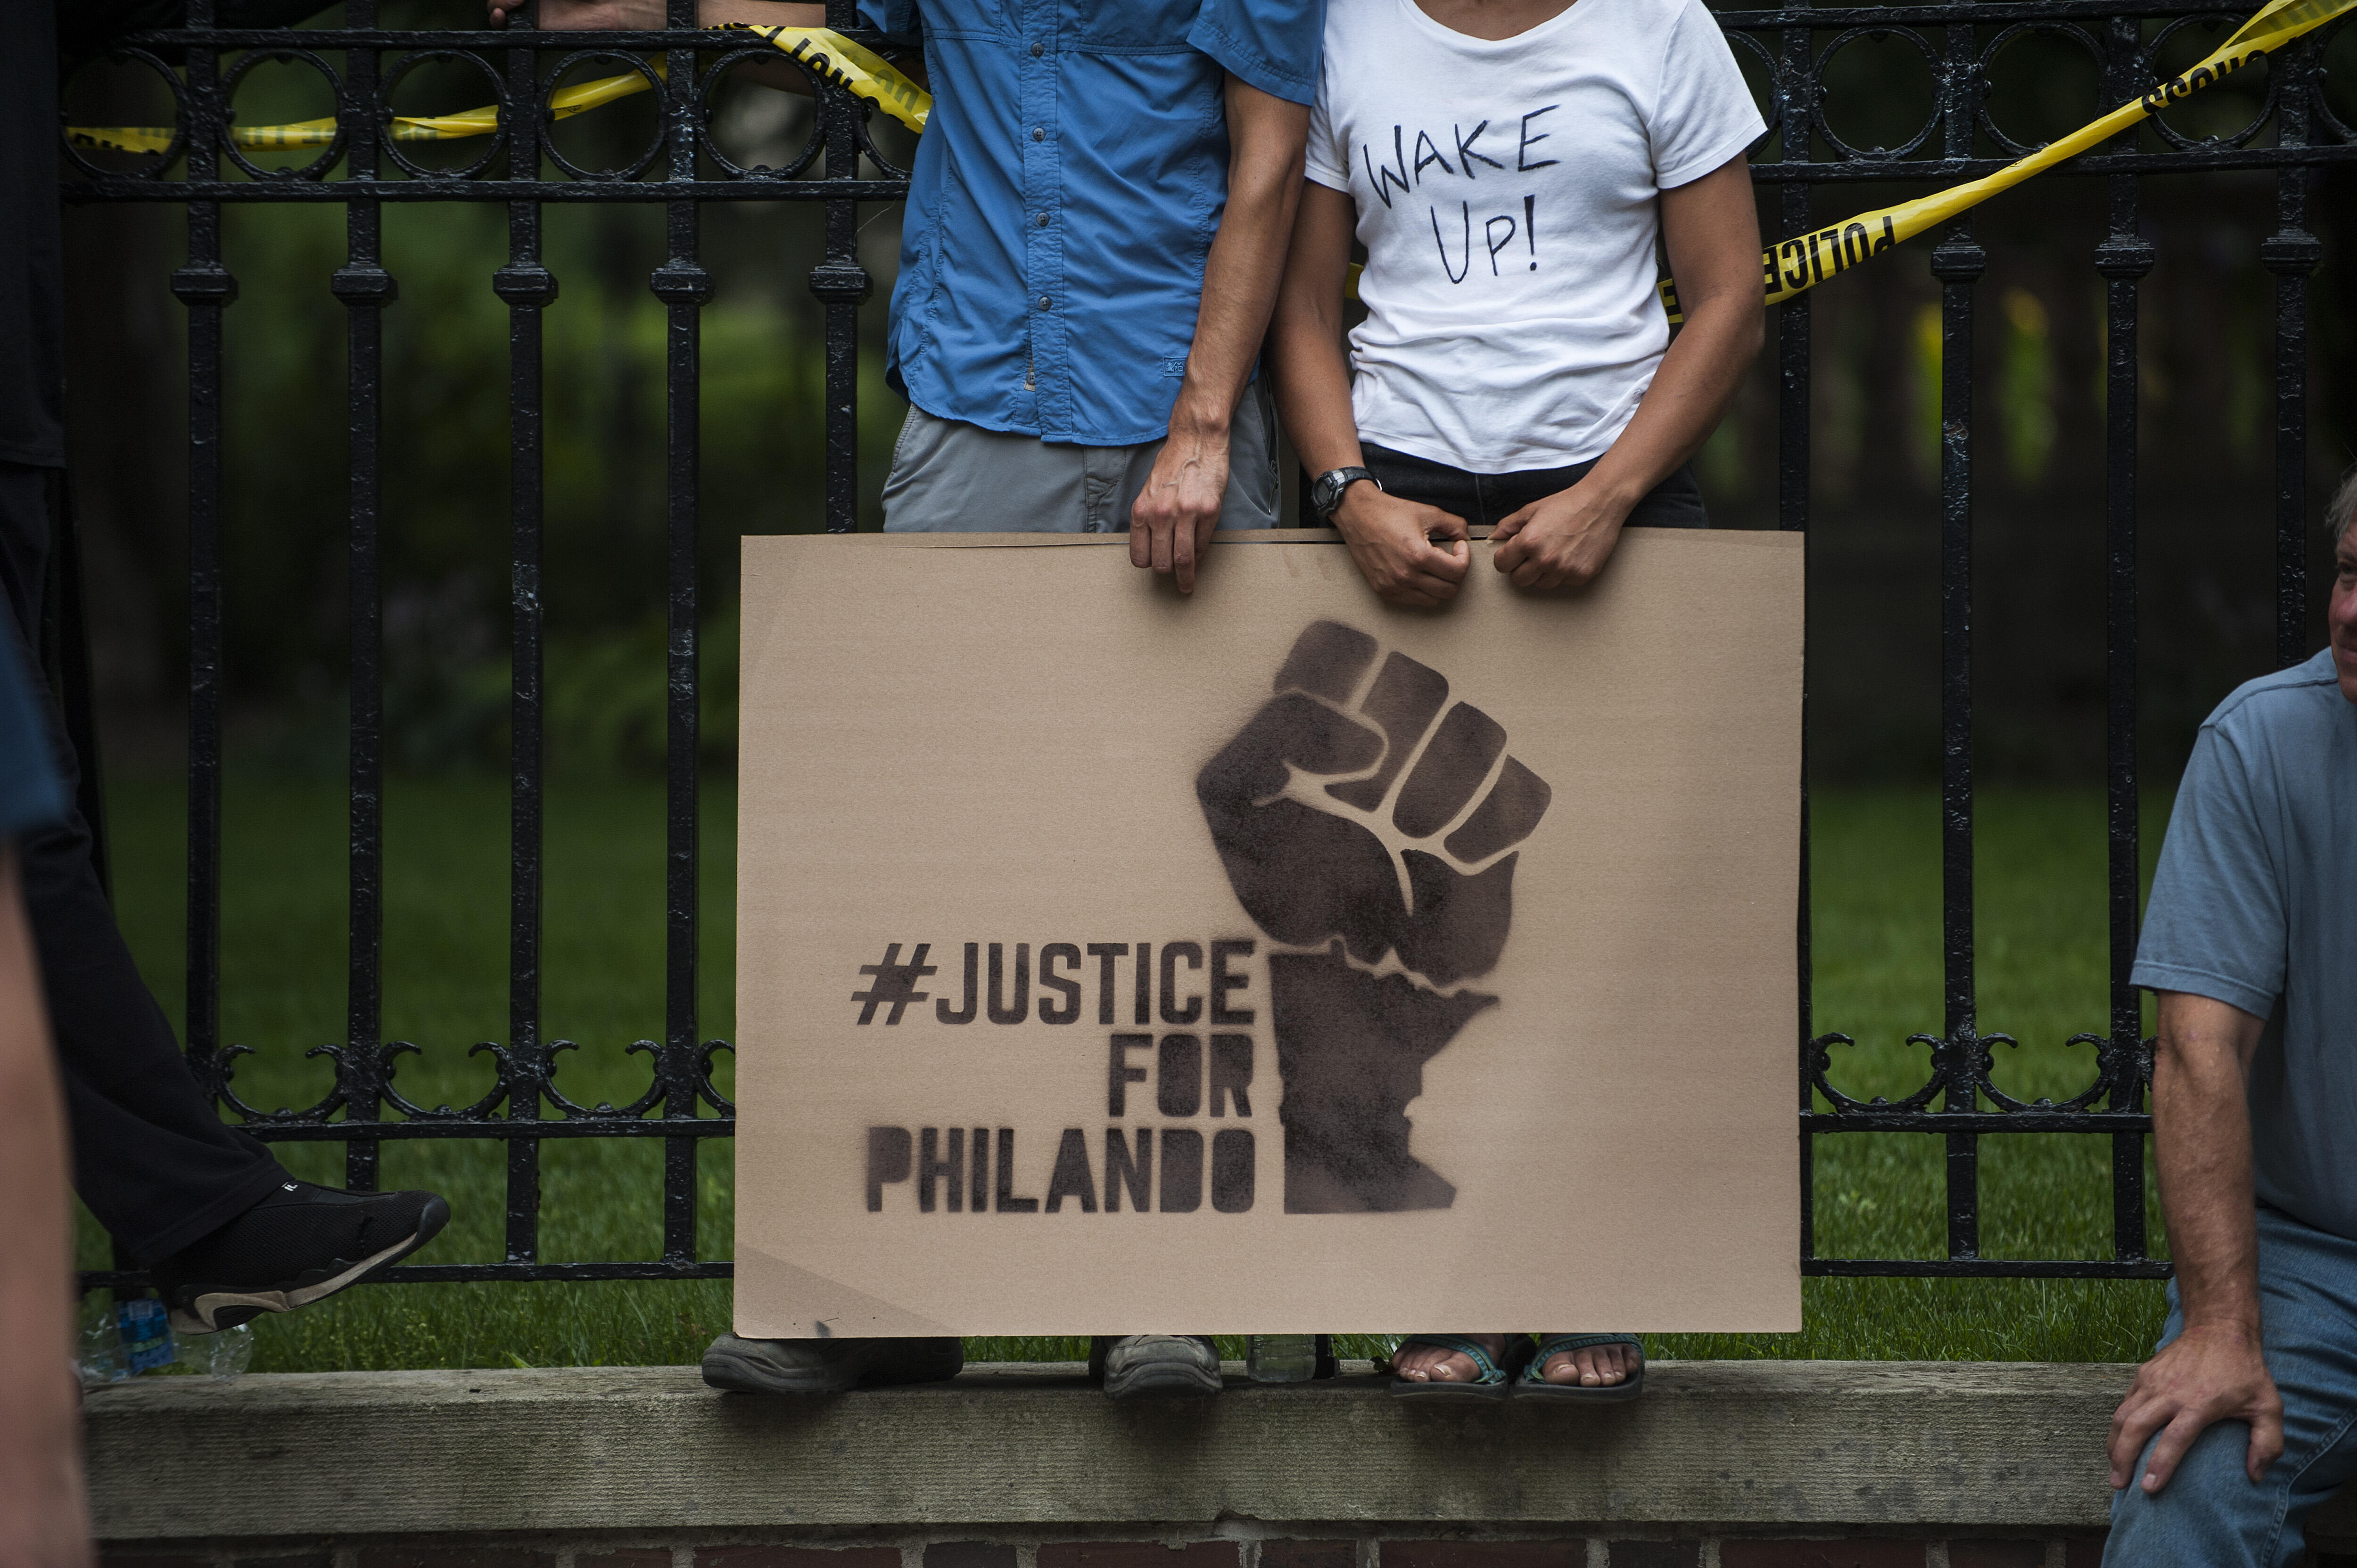 ST. PAUL, MN - JULY 07: A couple hold a sign protesting the killing of Philando Castile outside the Governor's Mansion on July 7, 2016 in St. Paul, Minnesota. Castile was shot and killed the previous night by a police officer in Falcon Heights, MN. (Photo